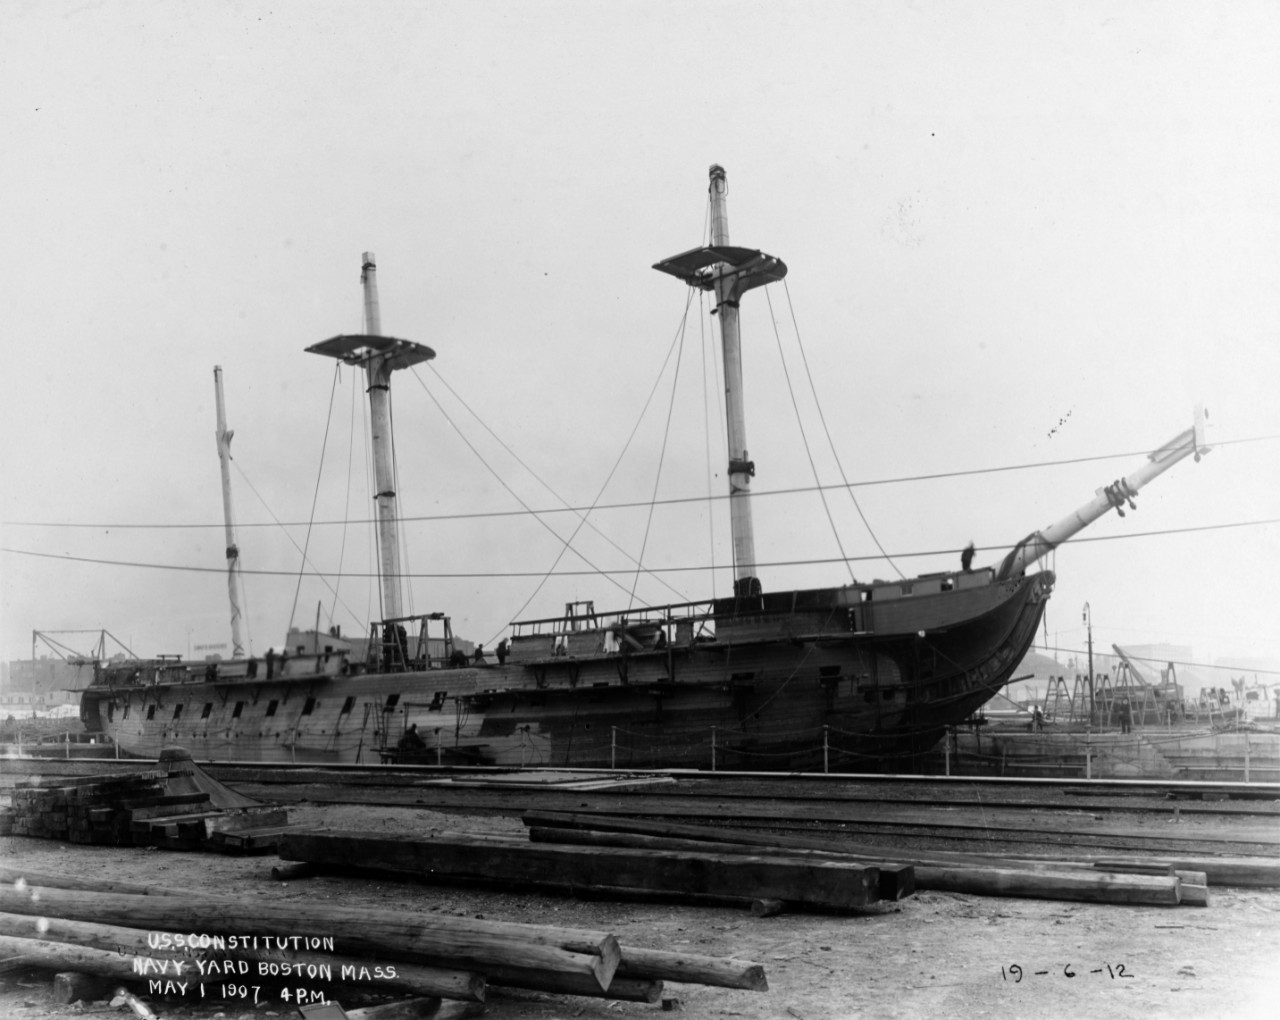 USS Constitution, after installing masts and stepping bowsprit, Boston Navy Yard, 1 May 1907.